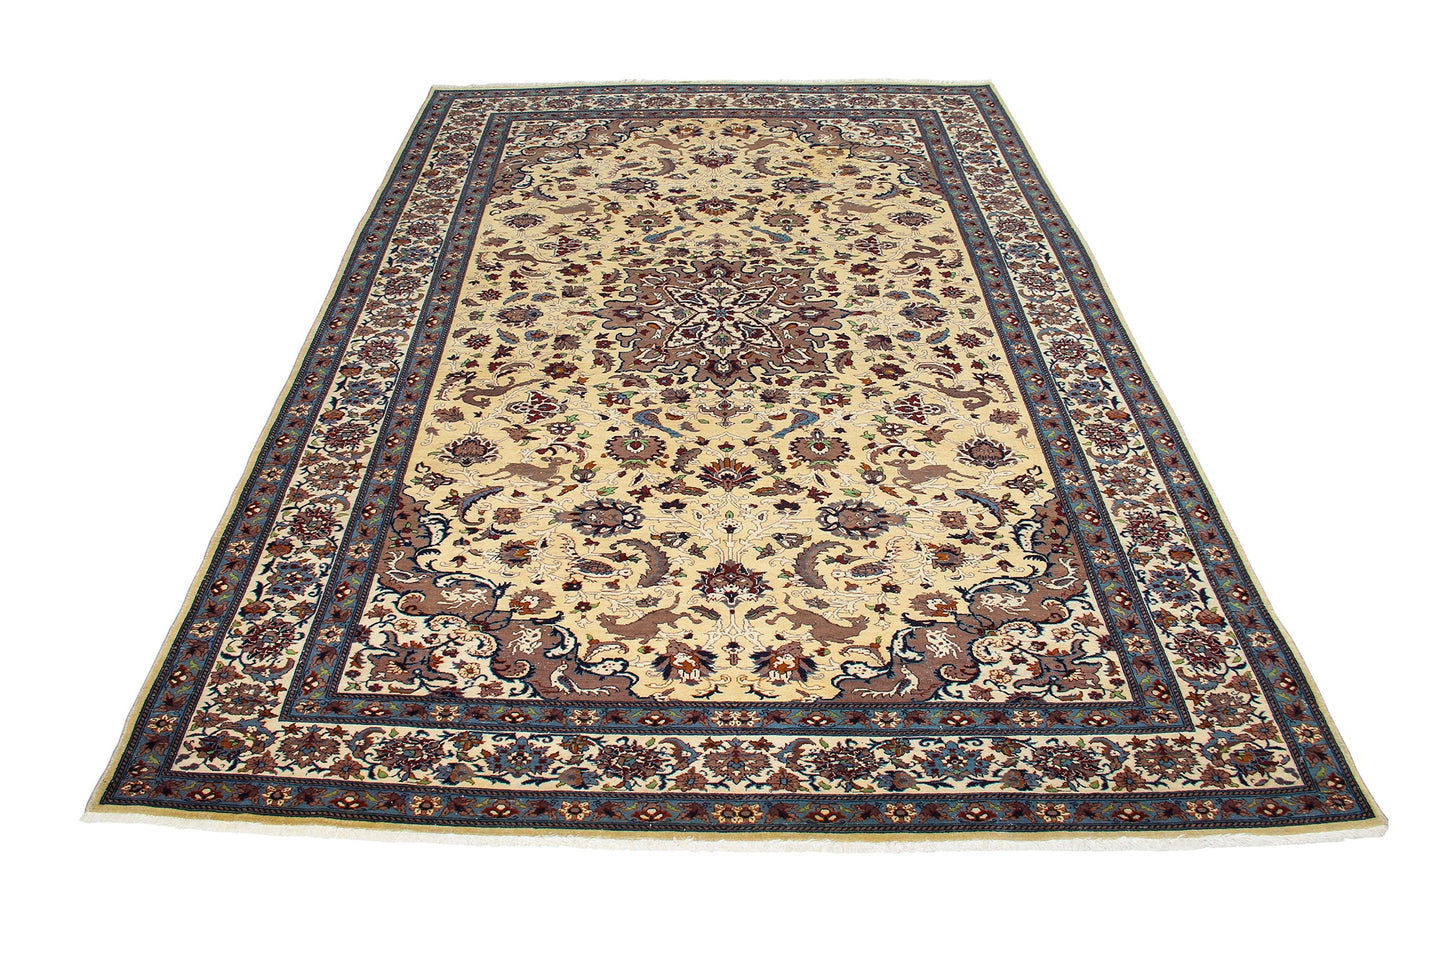 Persian Traditional Wool Hand-Knotted Nain Wool Area Rug product image #27556240851114